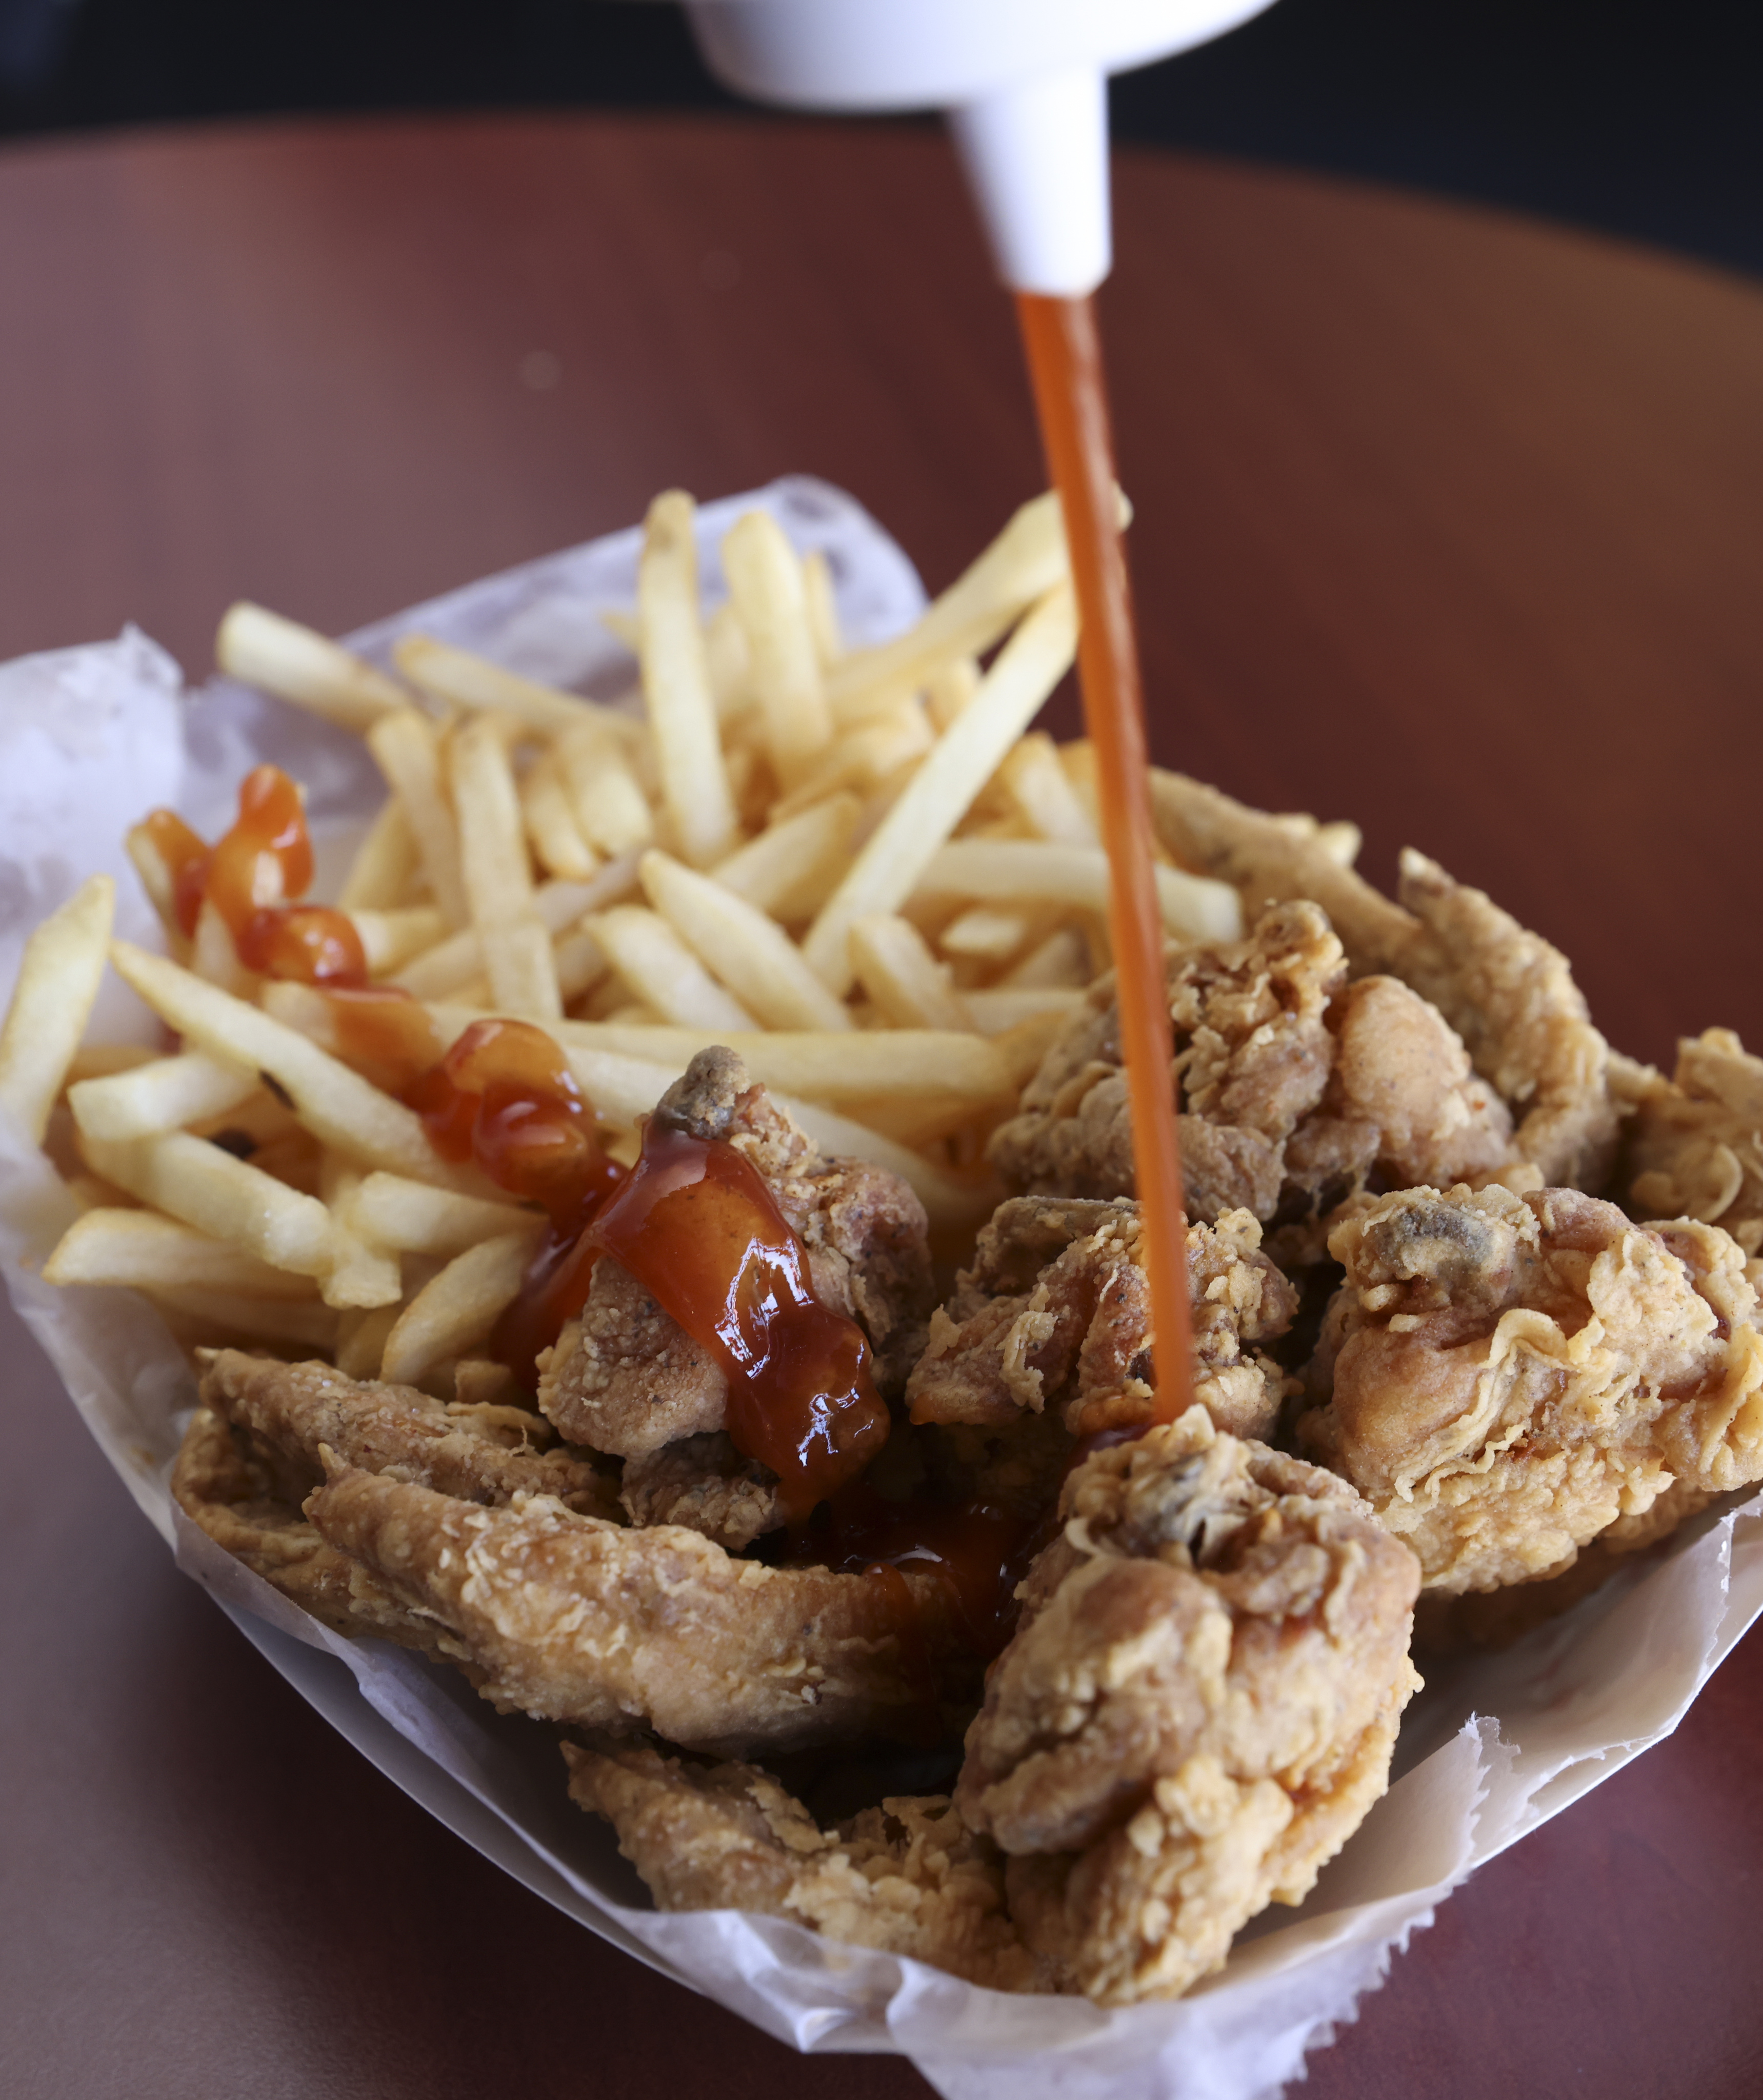 Chicago style fried chicken with Chicago mild sauce. : r/food